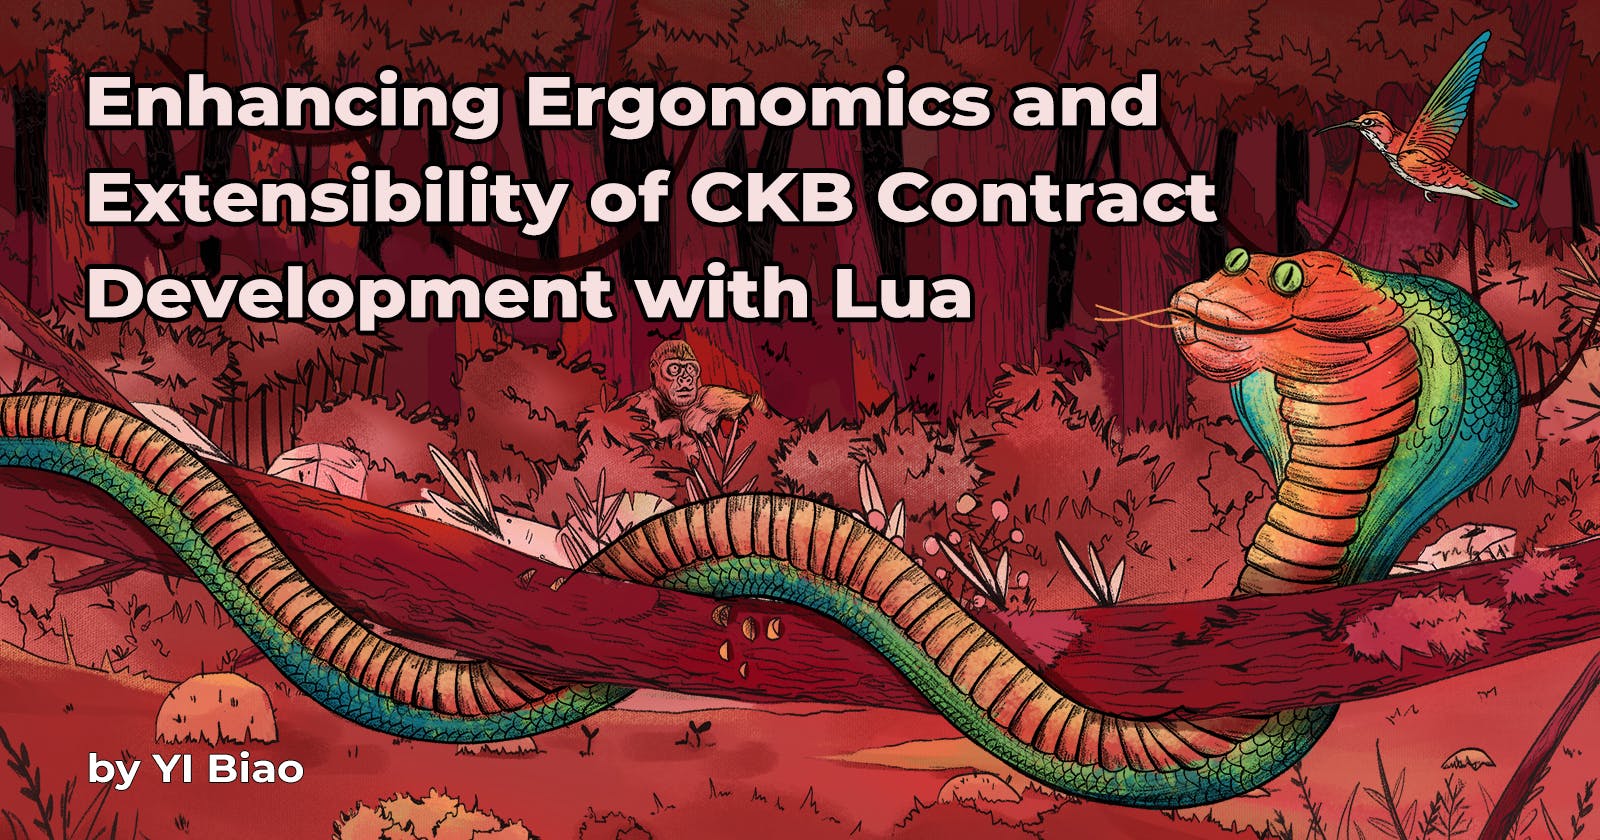 Enhancing Ergonomics and Extensibility of CKB Contract Development with Lua